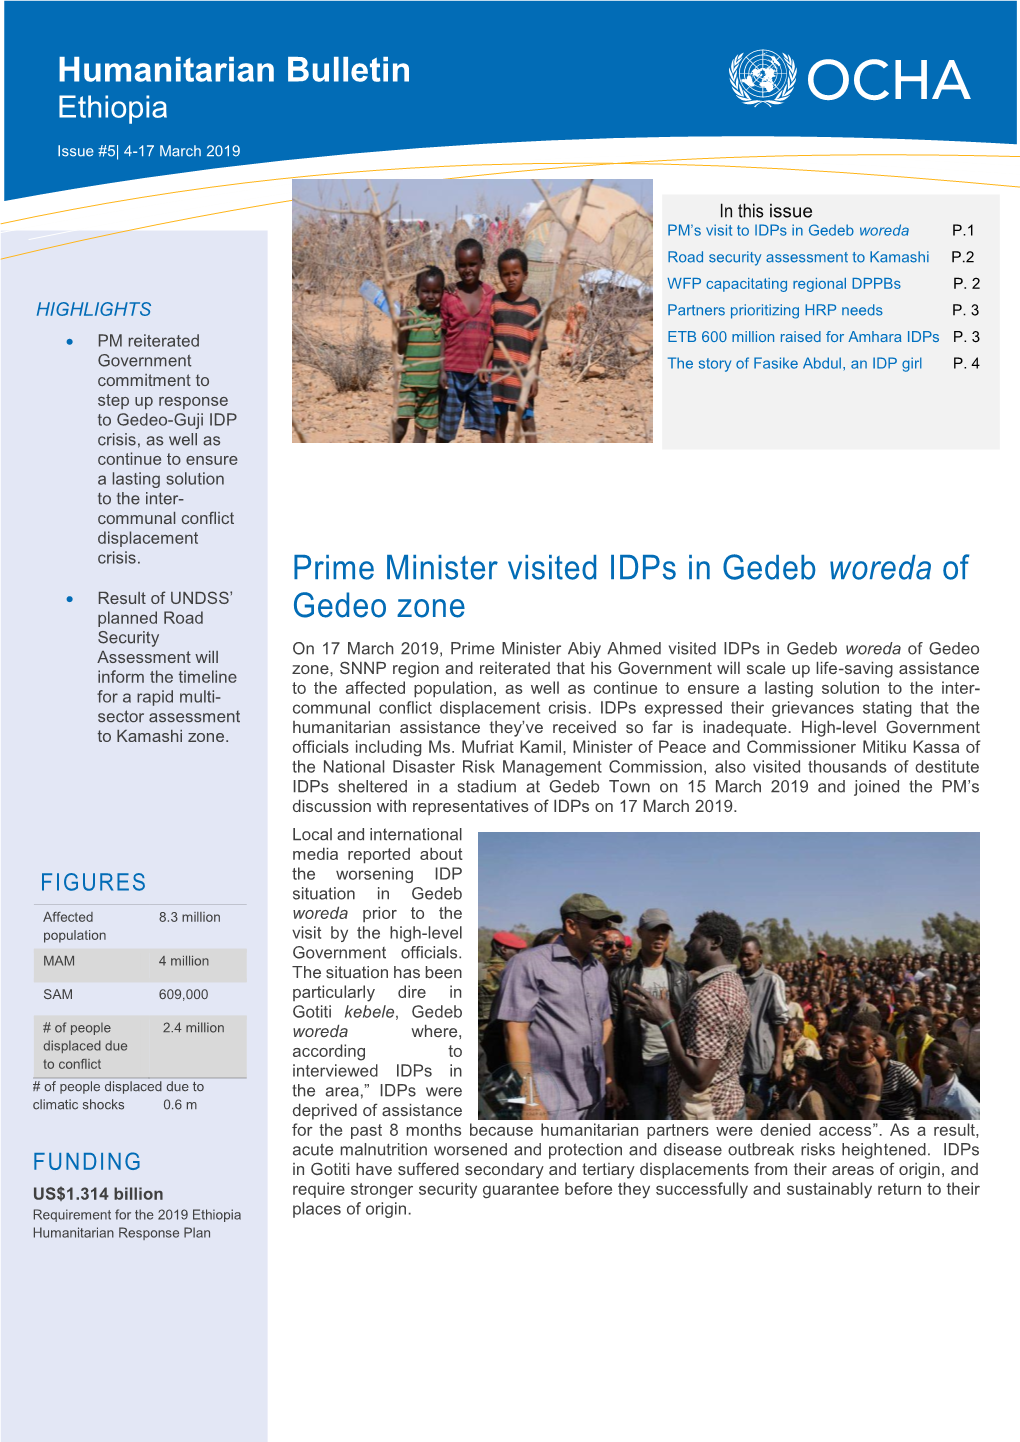 Prime Minister Visited Idps in Gedeb Woreda of Gedeo Zone